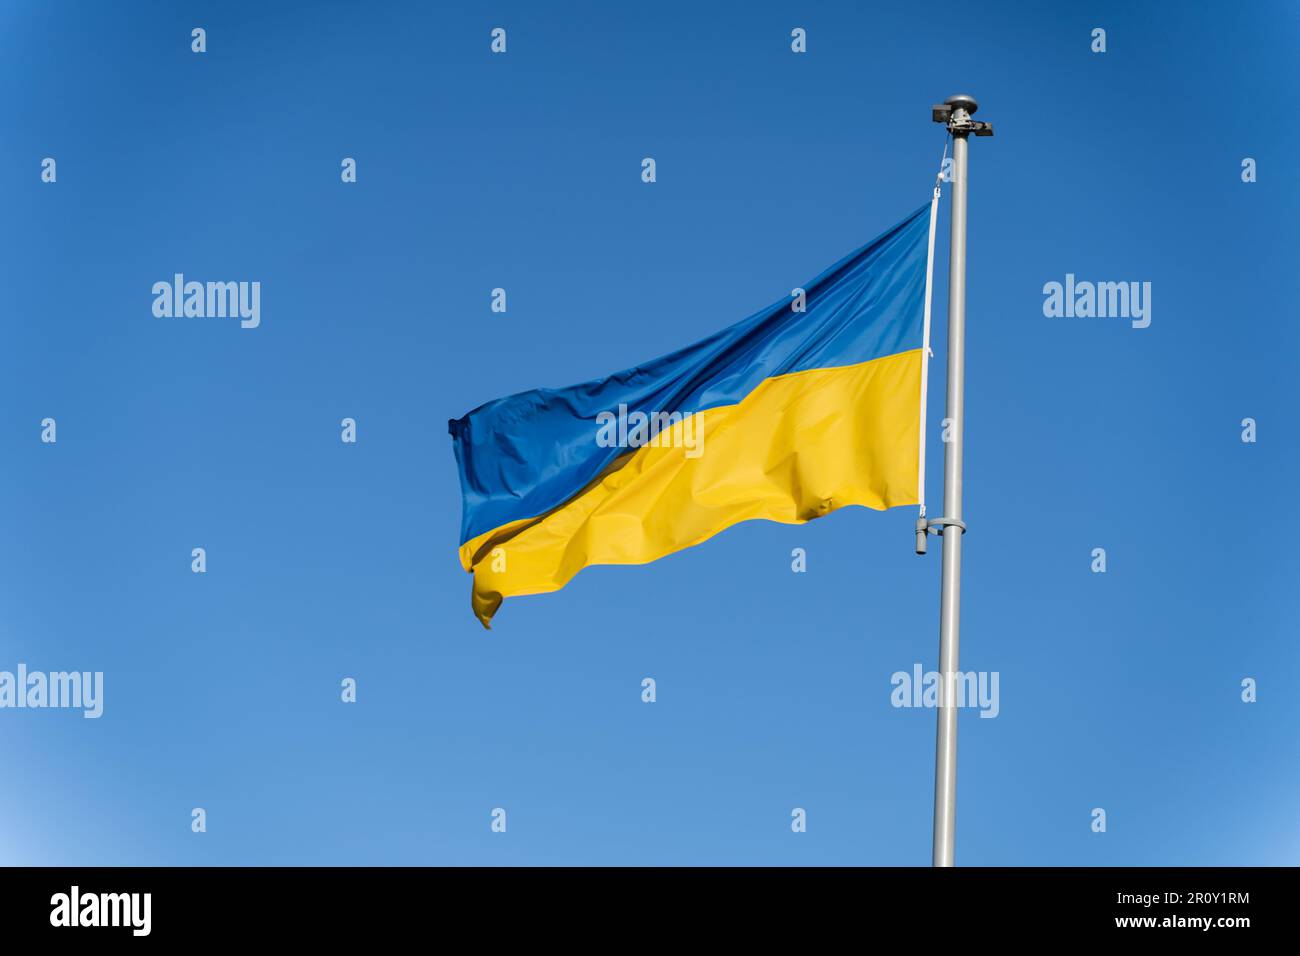 Blue-yellow Ukrainian flag flies against the background of clear blue sky. Stock Photo